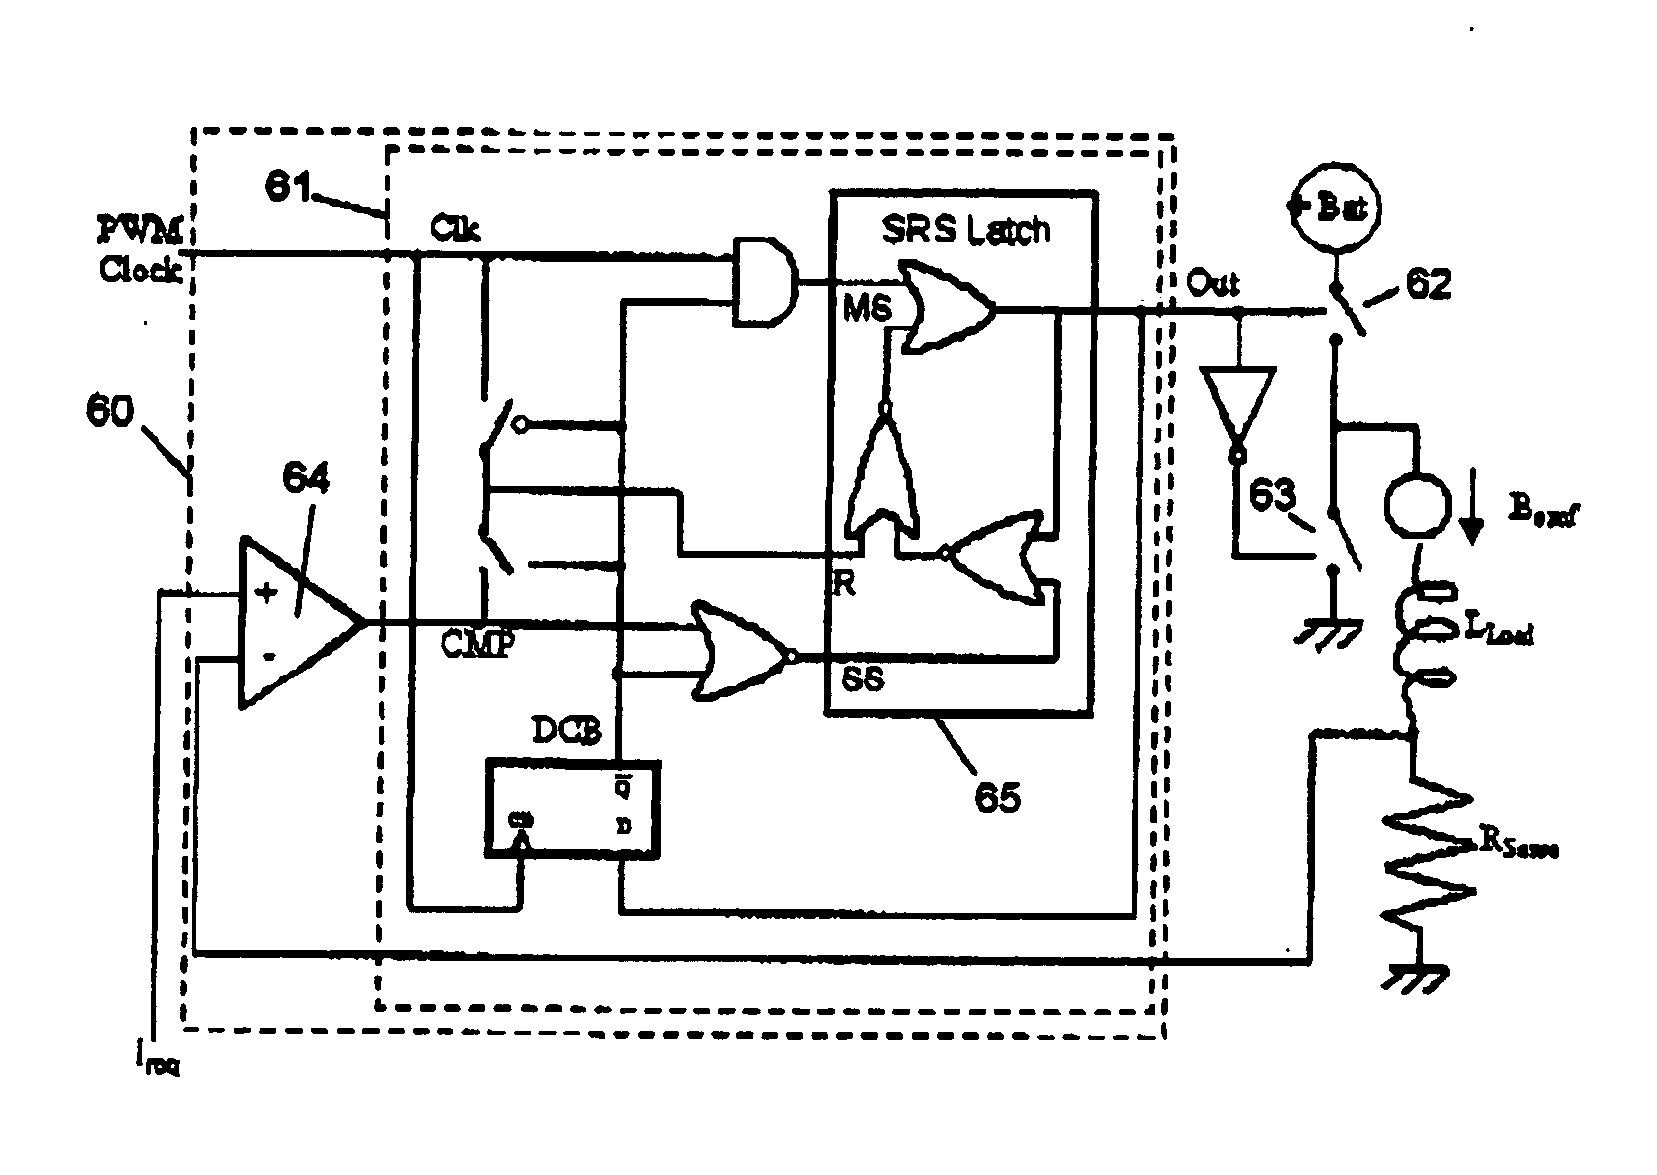 Control of current in an inductance with pulse width modulation at control frequency